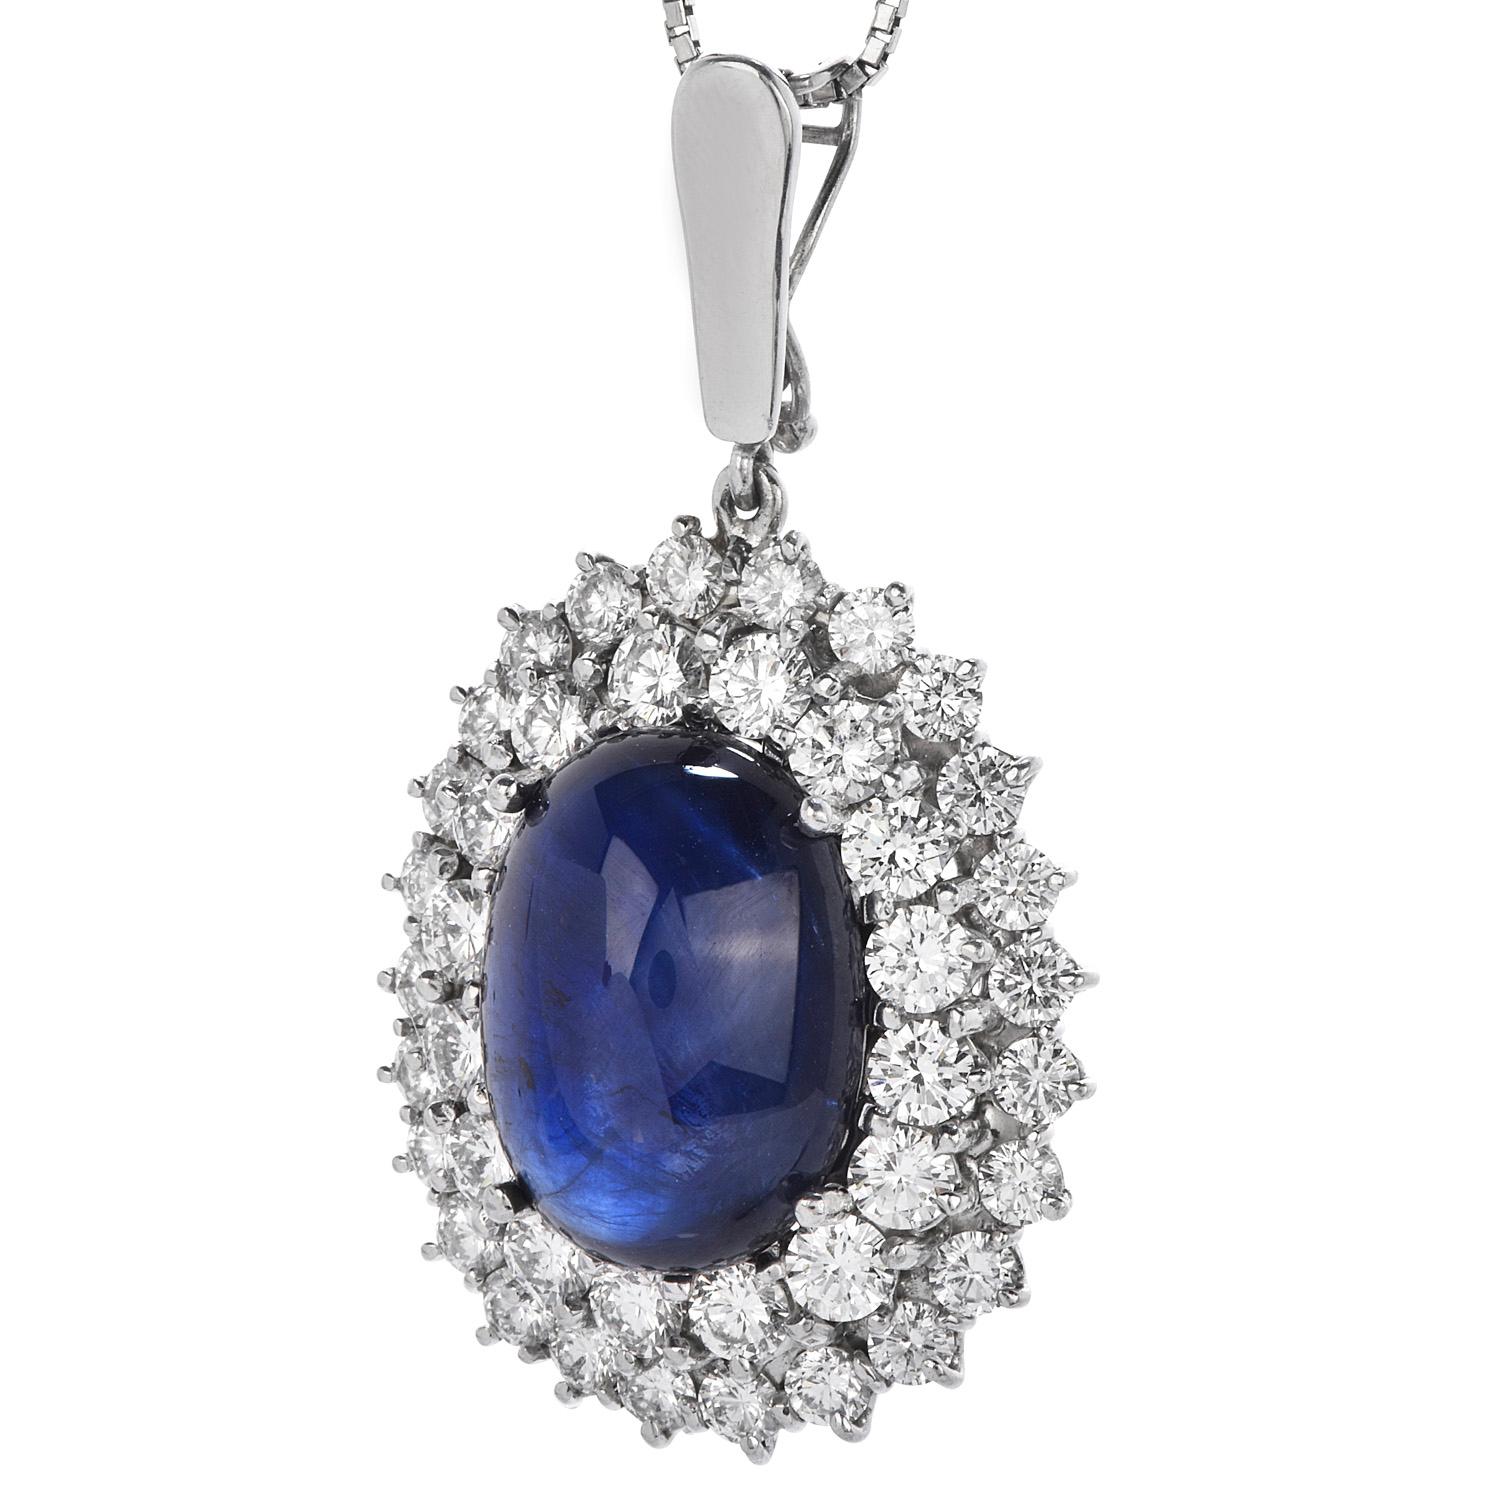 Shining from Every side, this pendant is the perfect enhancer to any necklace, 

Crafted in solid Platinum, with a center with a GIA-certified Blue Sapphire from Thailand with minor heat treatment, oval cabochon cut, prong-set, weighing